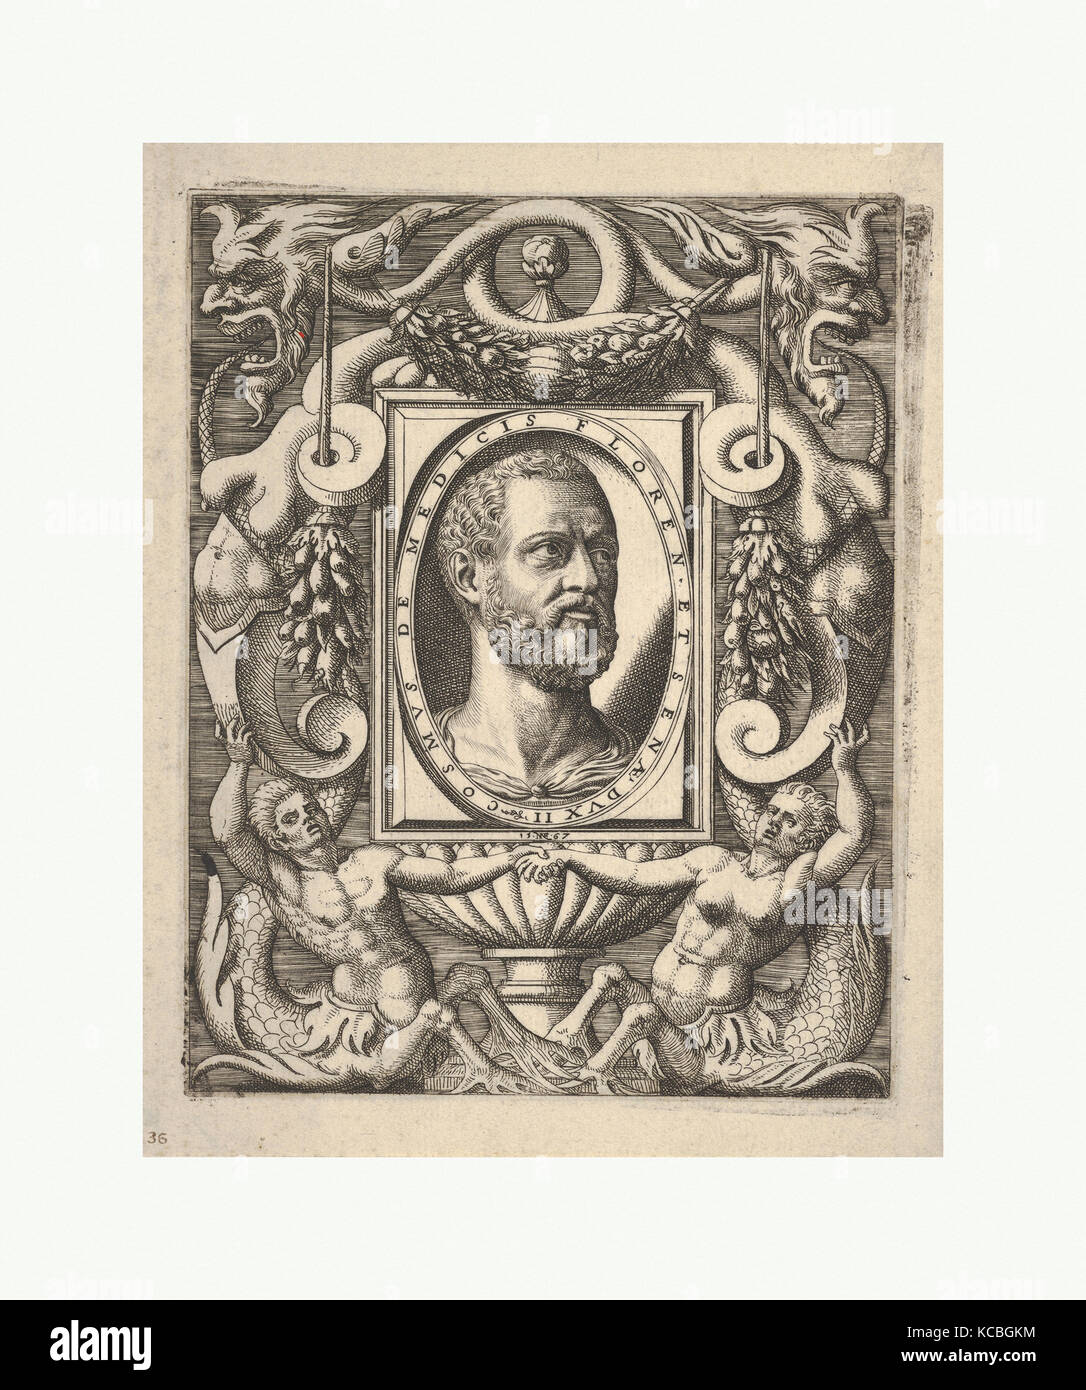 Bust portrait of Cosimo I de' Medici, in an oval frame set within a rectangular plaque, surrounded by fantastical ornament Stock Photo